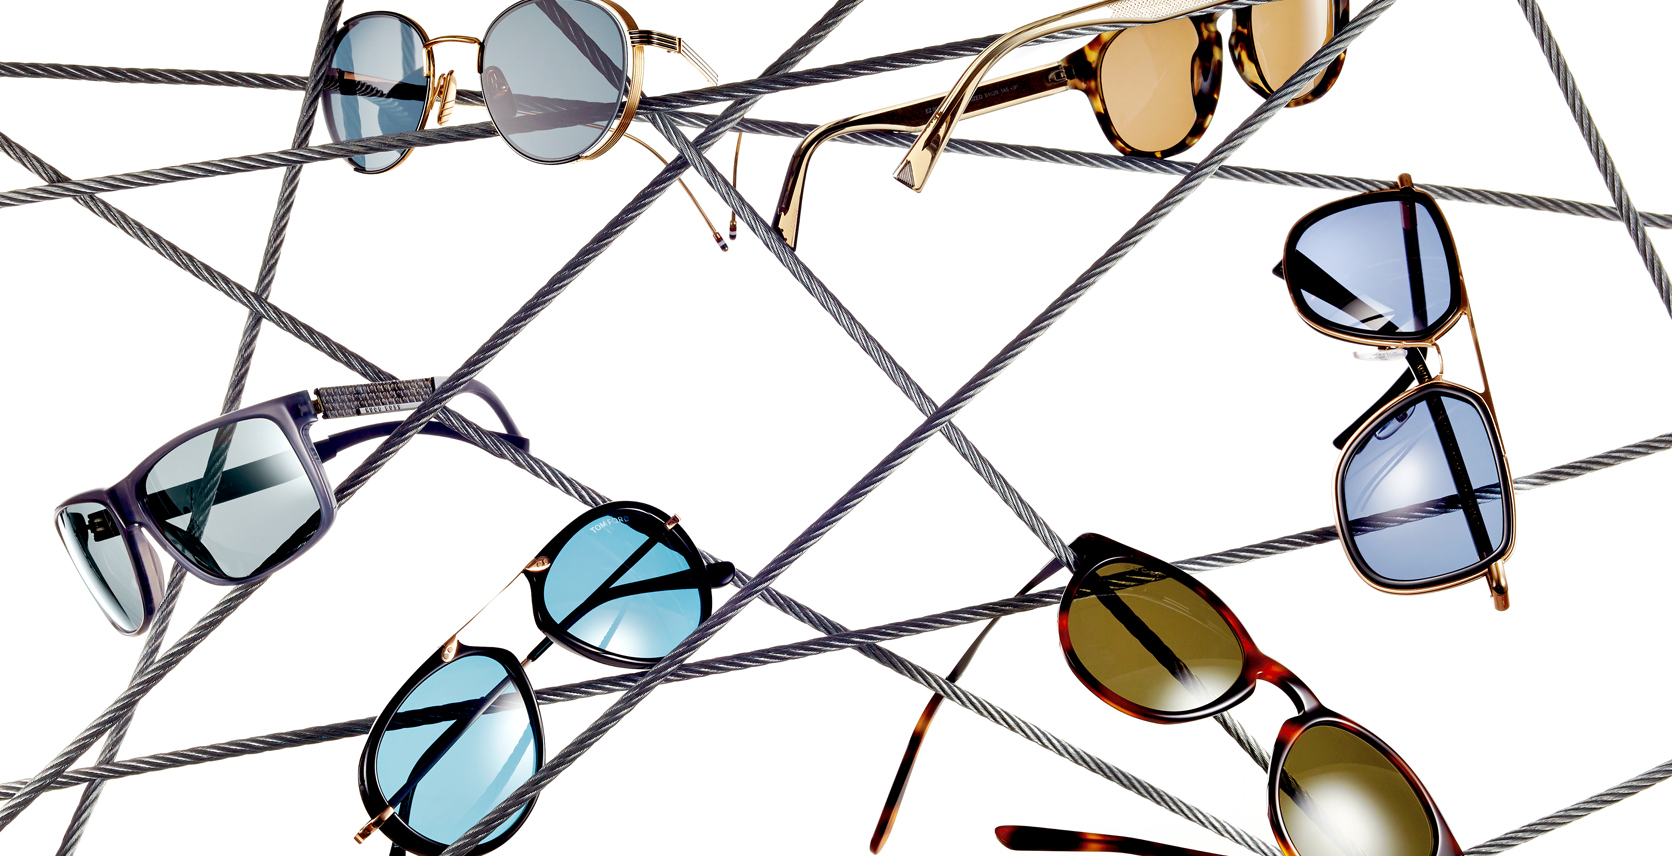 Throwing Shades: The 6 Best Sunglasses for Summer - Sharp Magazine